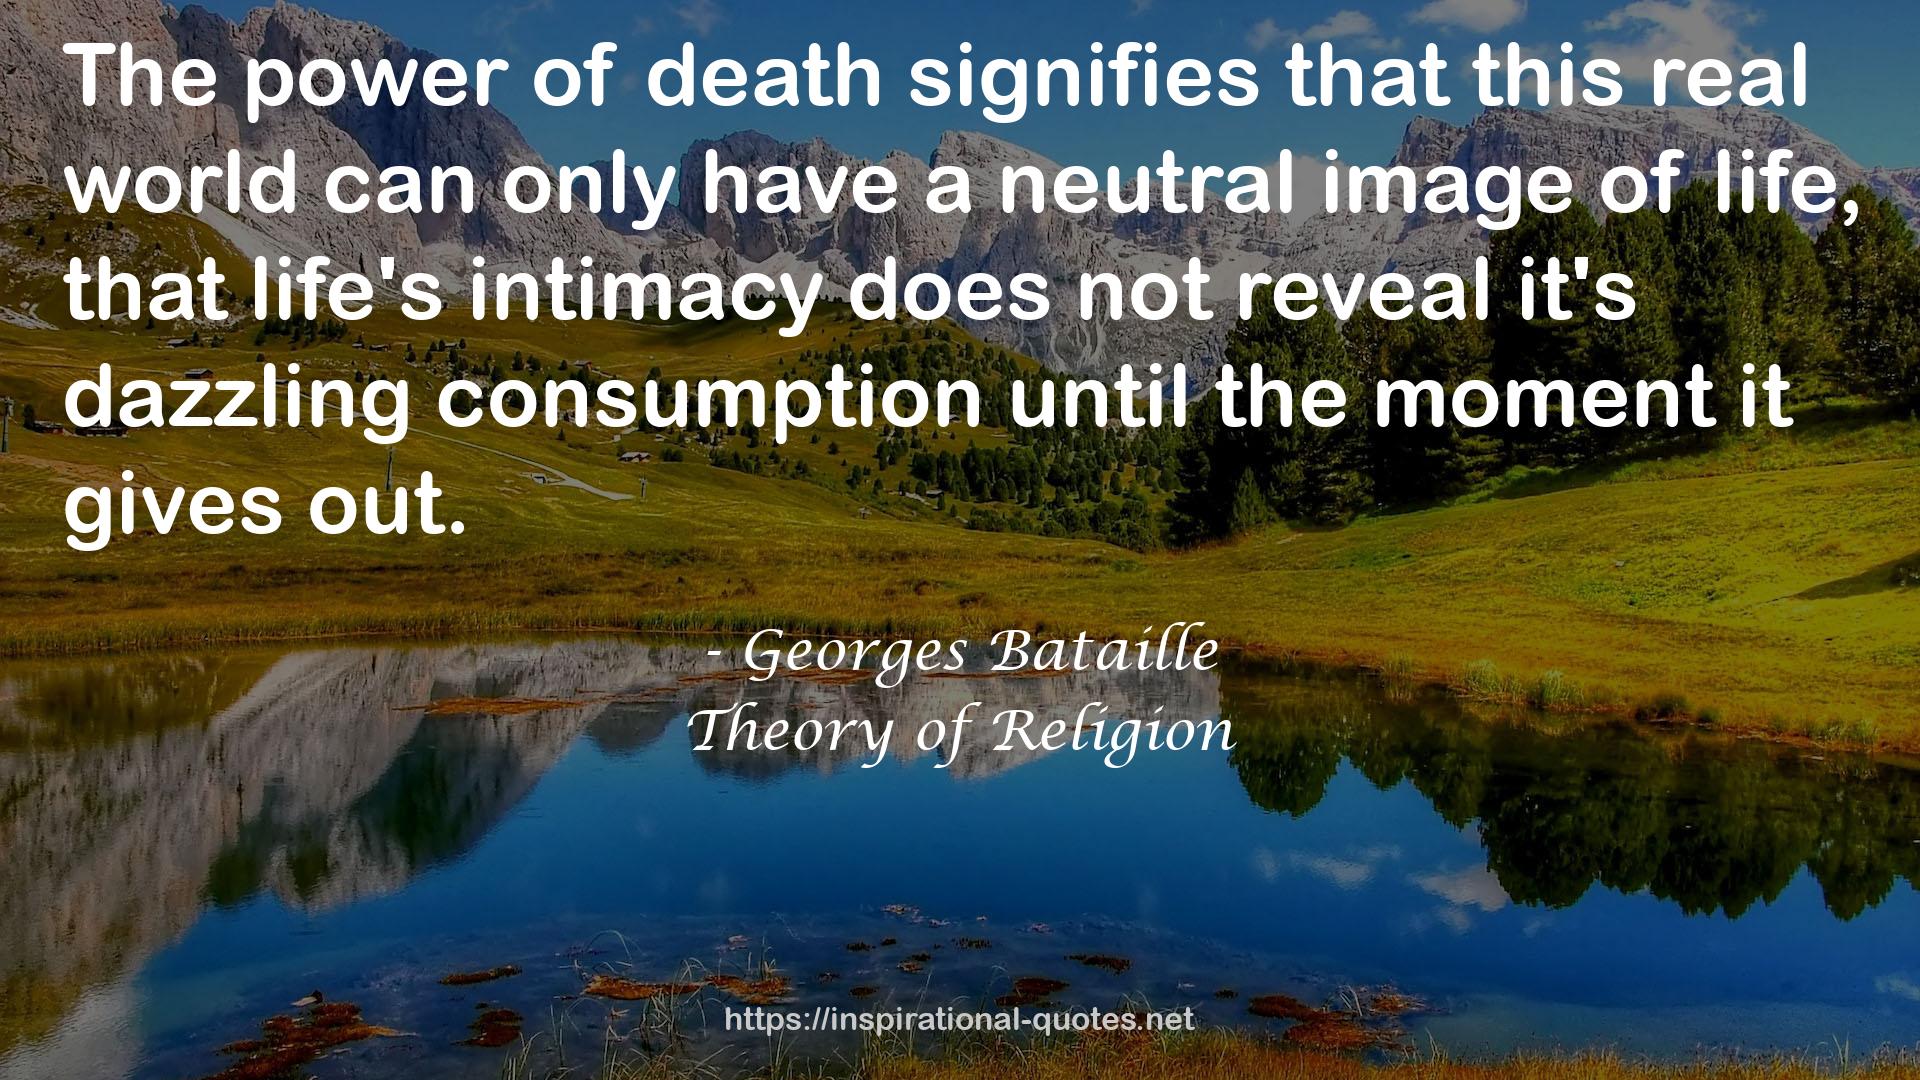 Georges Bataille QUOTES